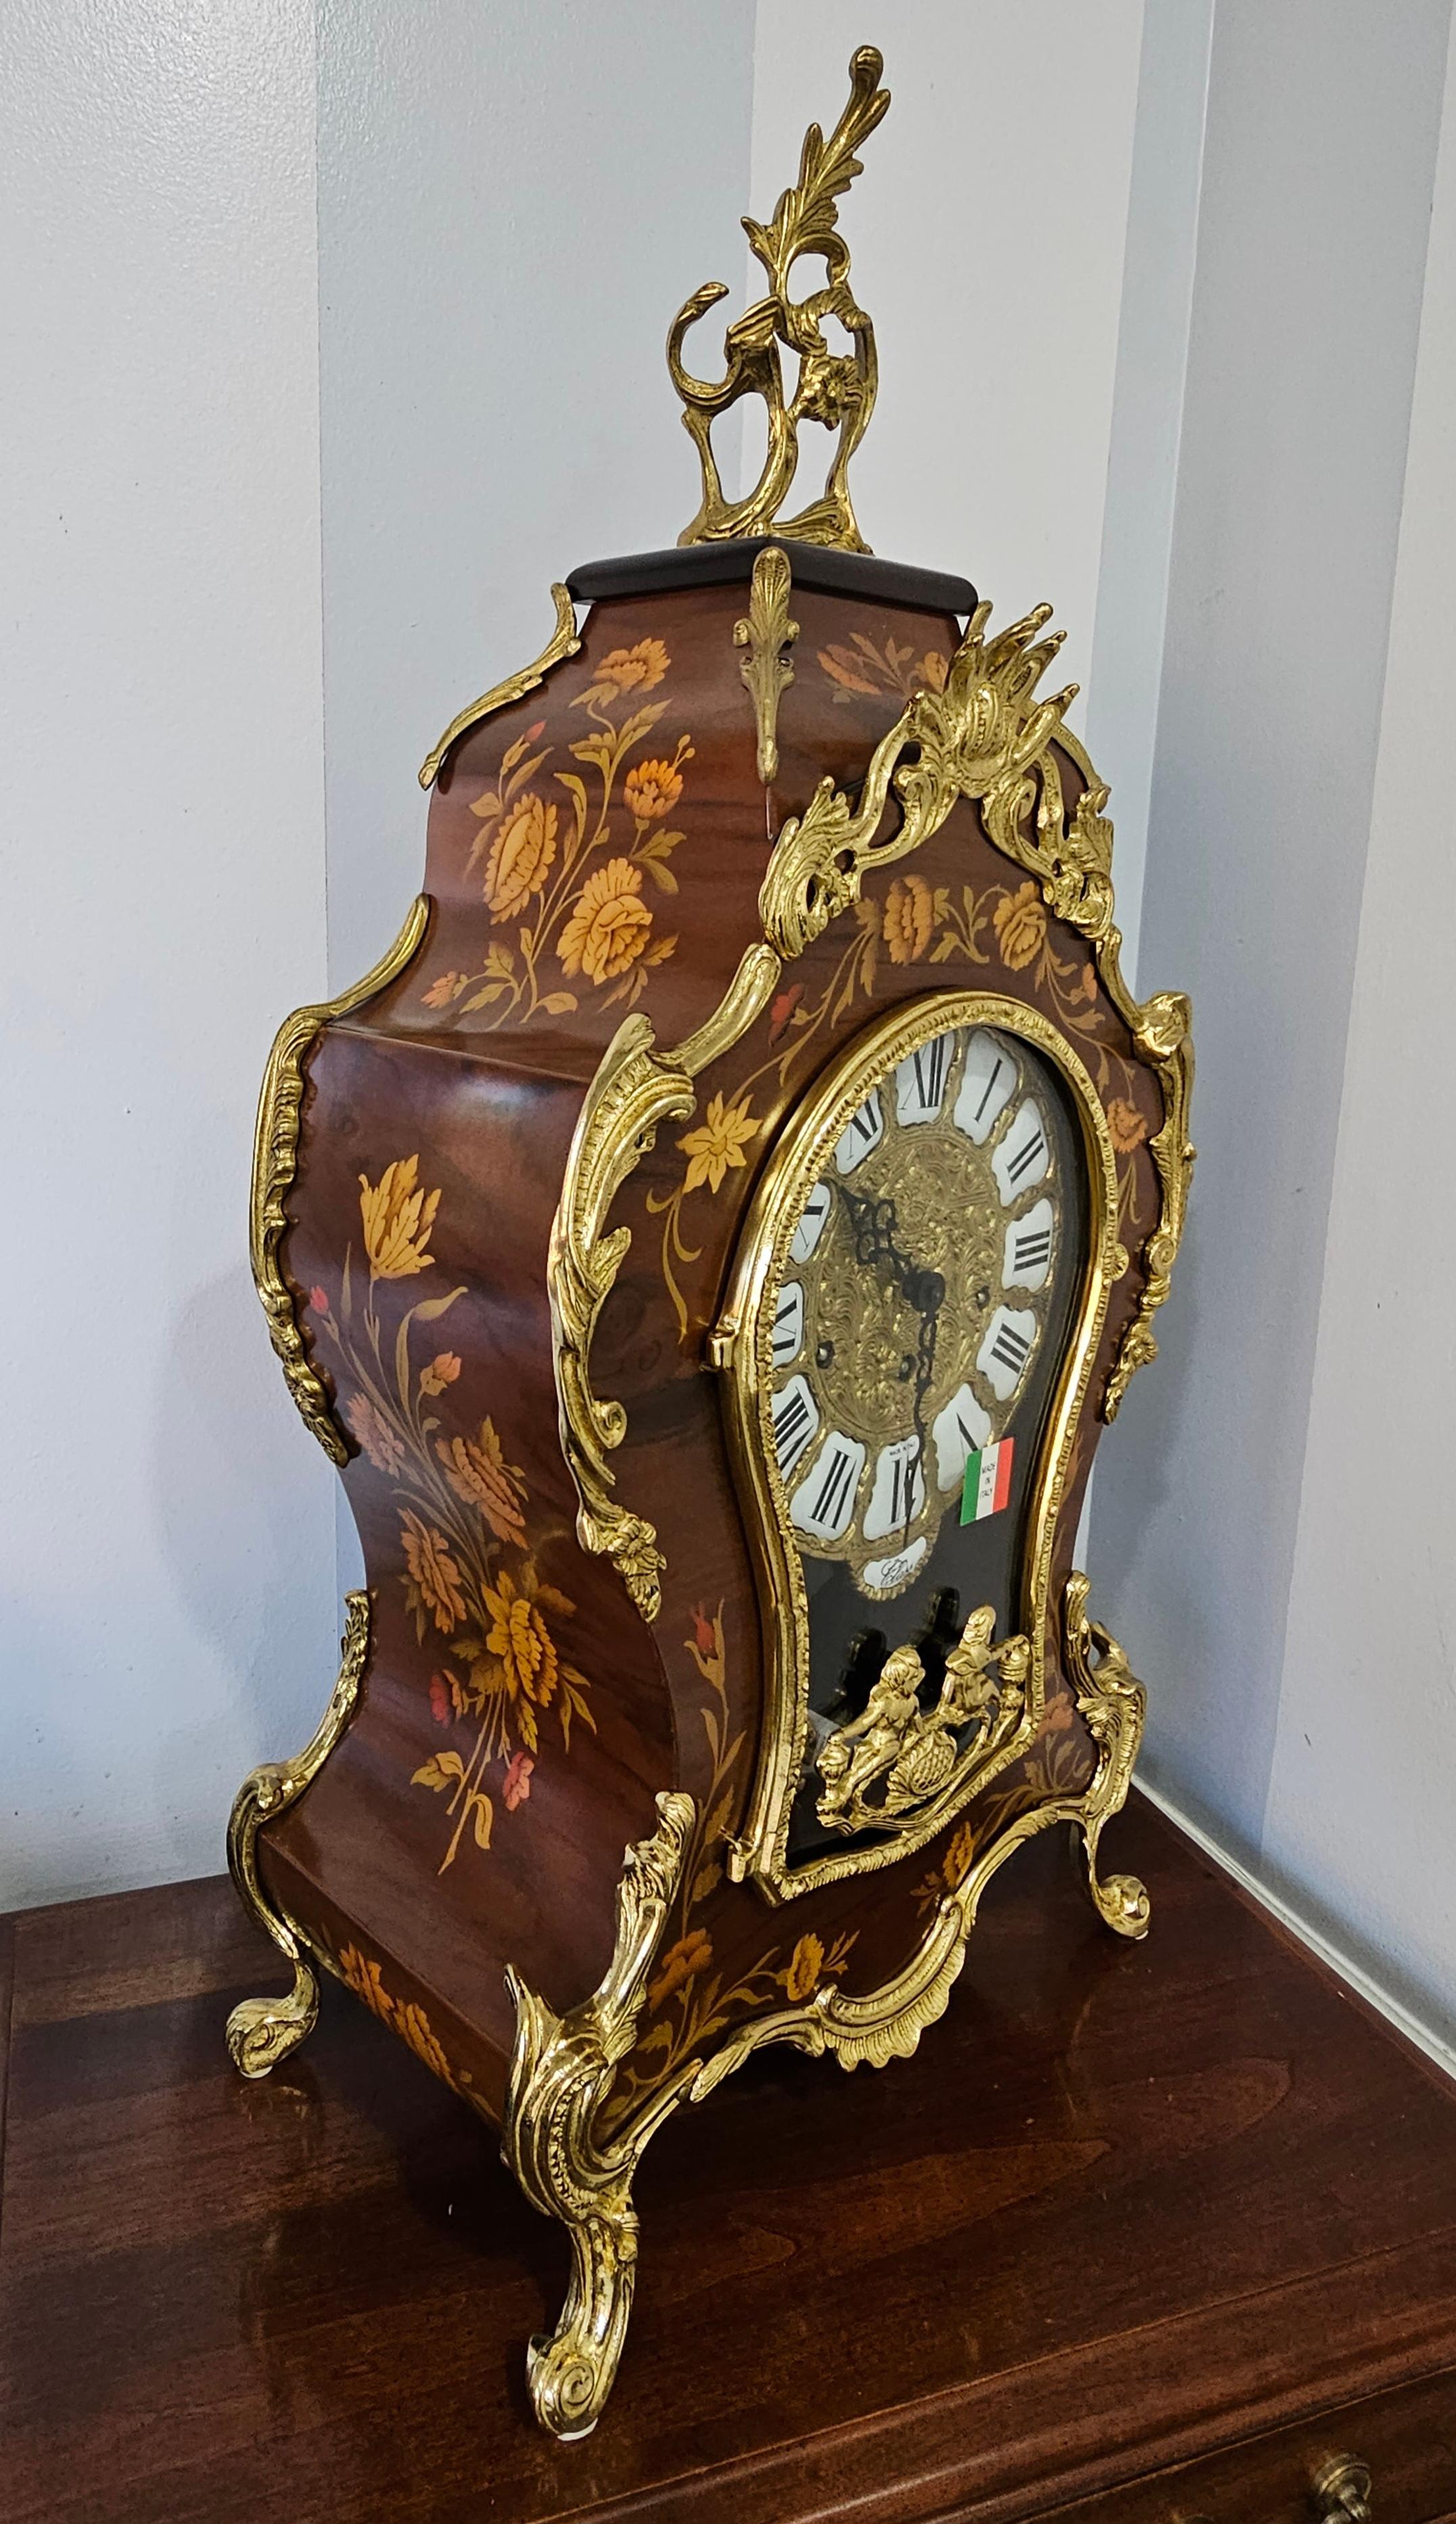 New Franz Hermle Mantel Clock in DeArt Italian Fine Marquetry and Ormolu Case, N In Excellent Condition For Sale In Germantown, MD